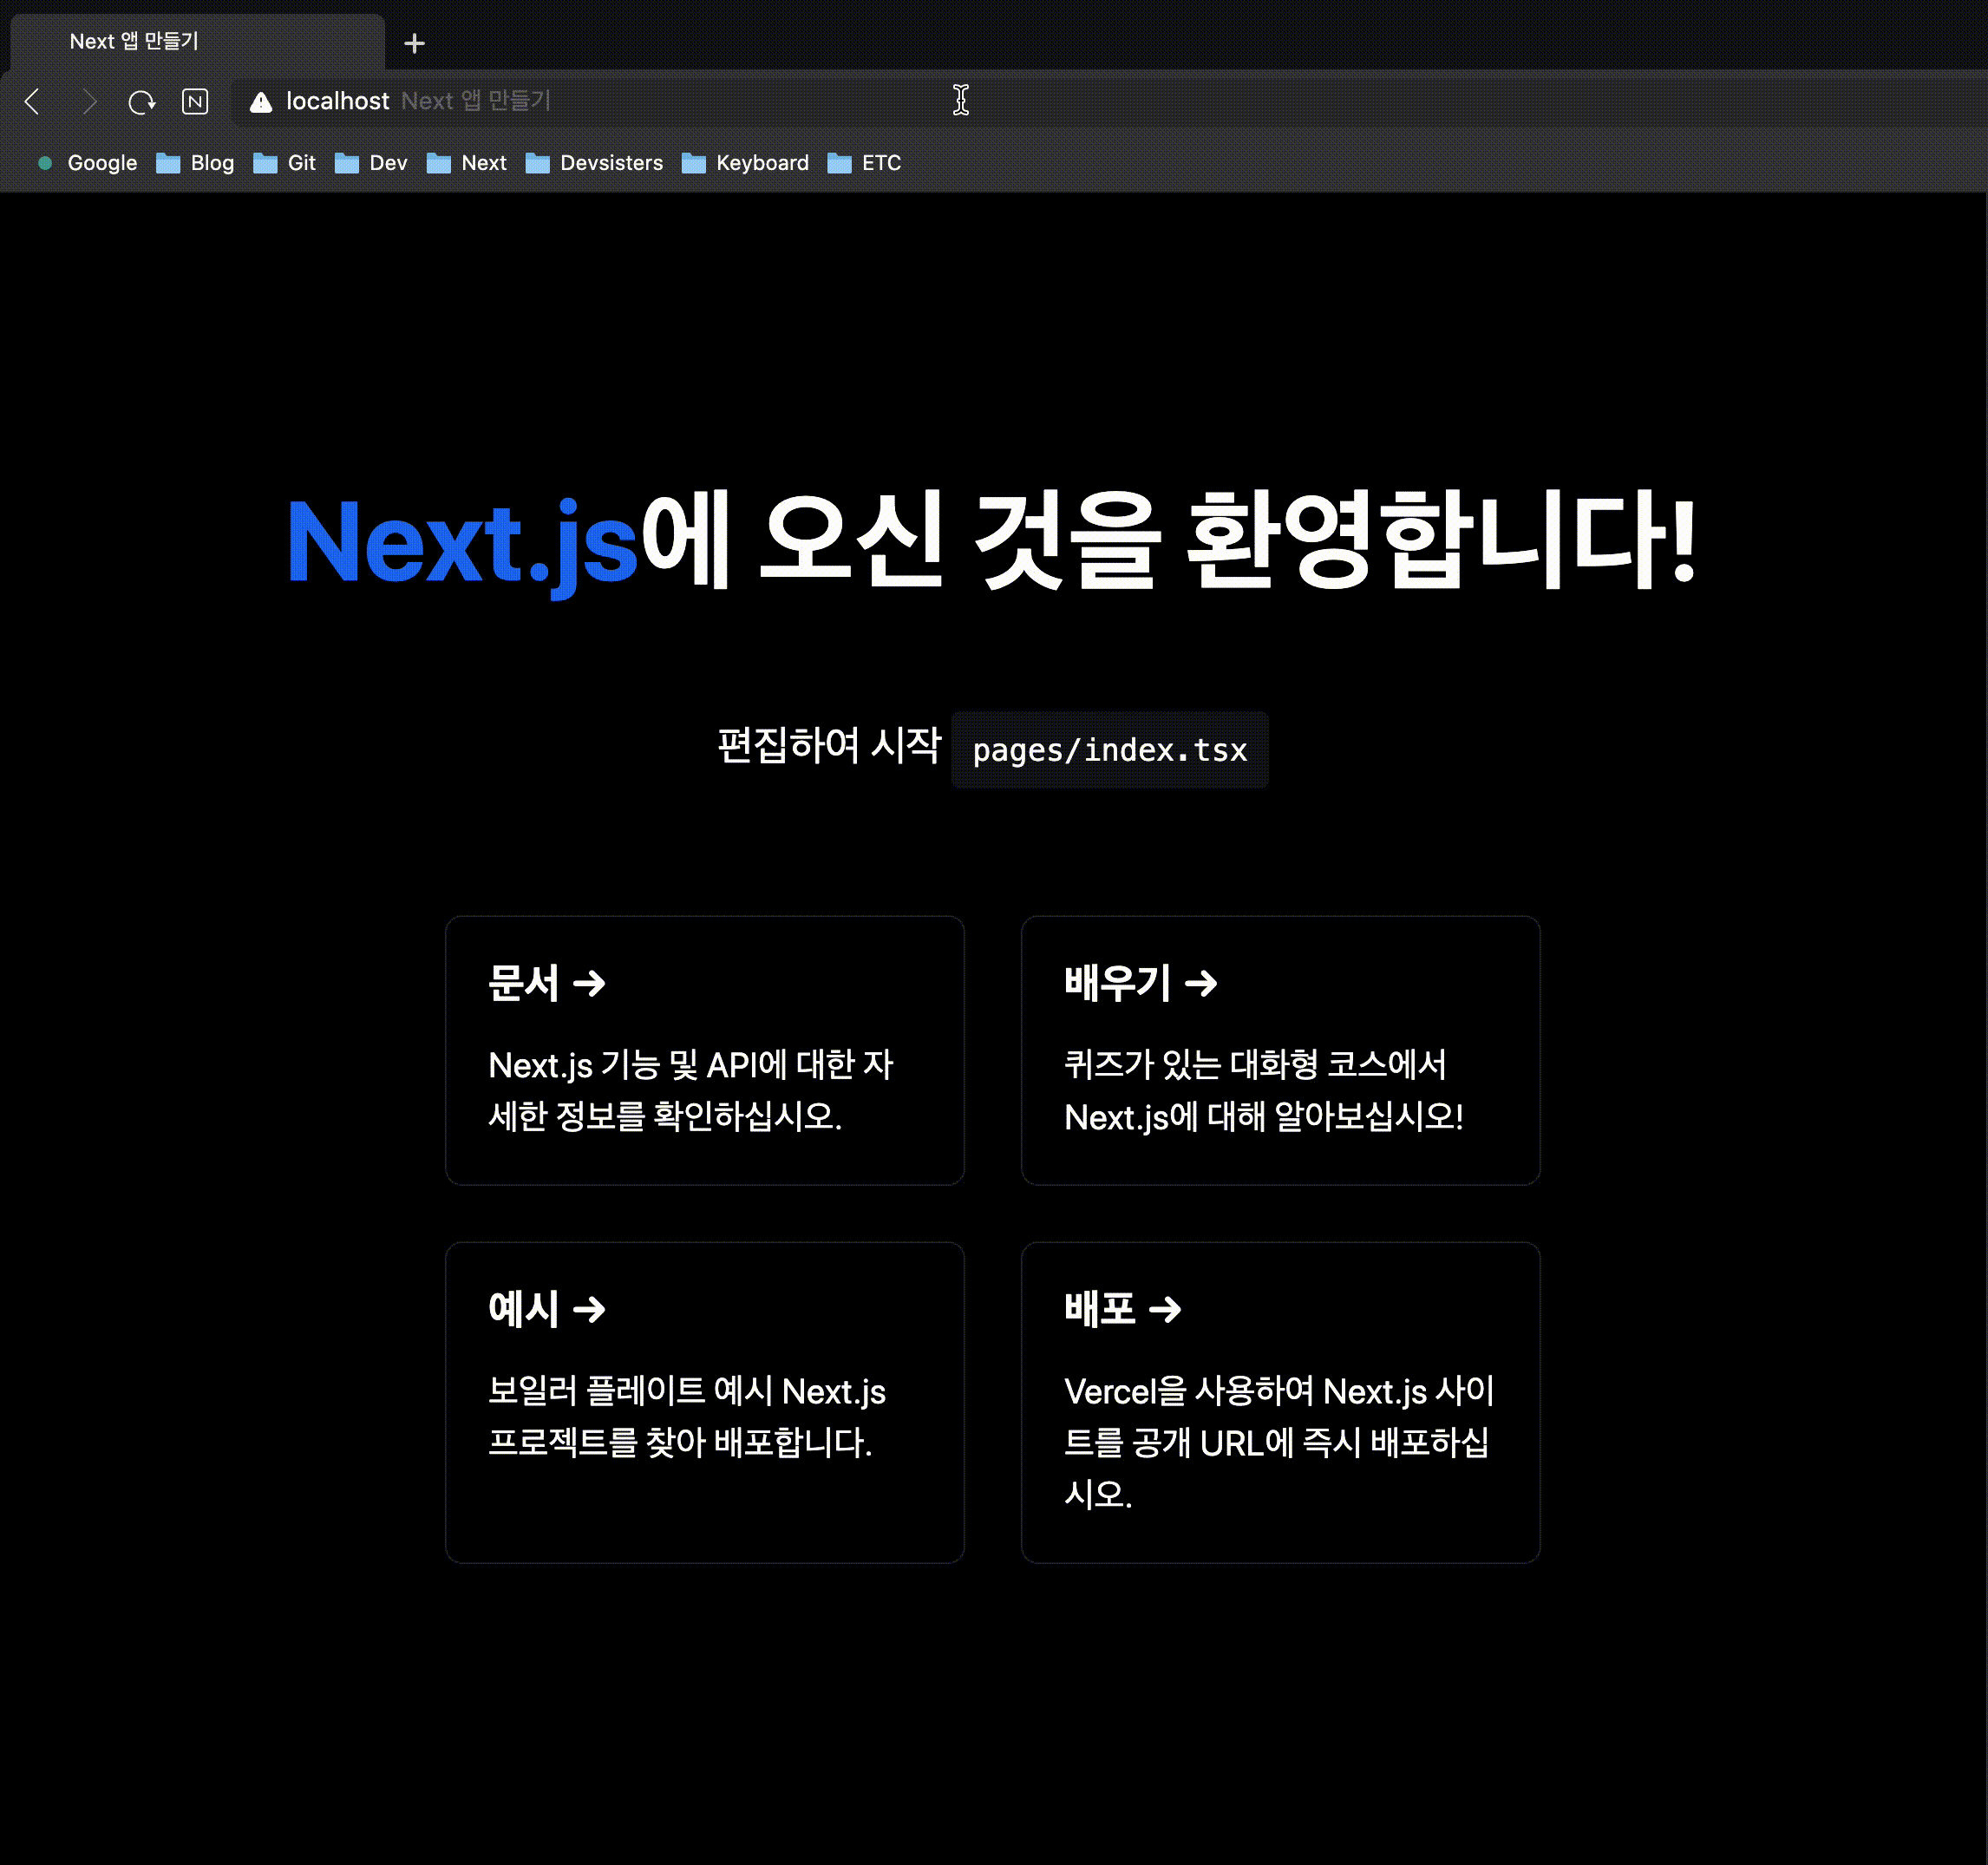 When browser language is in Korean